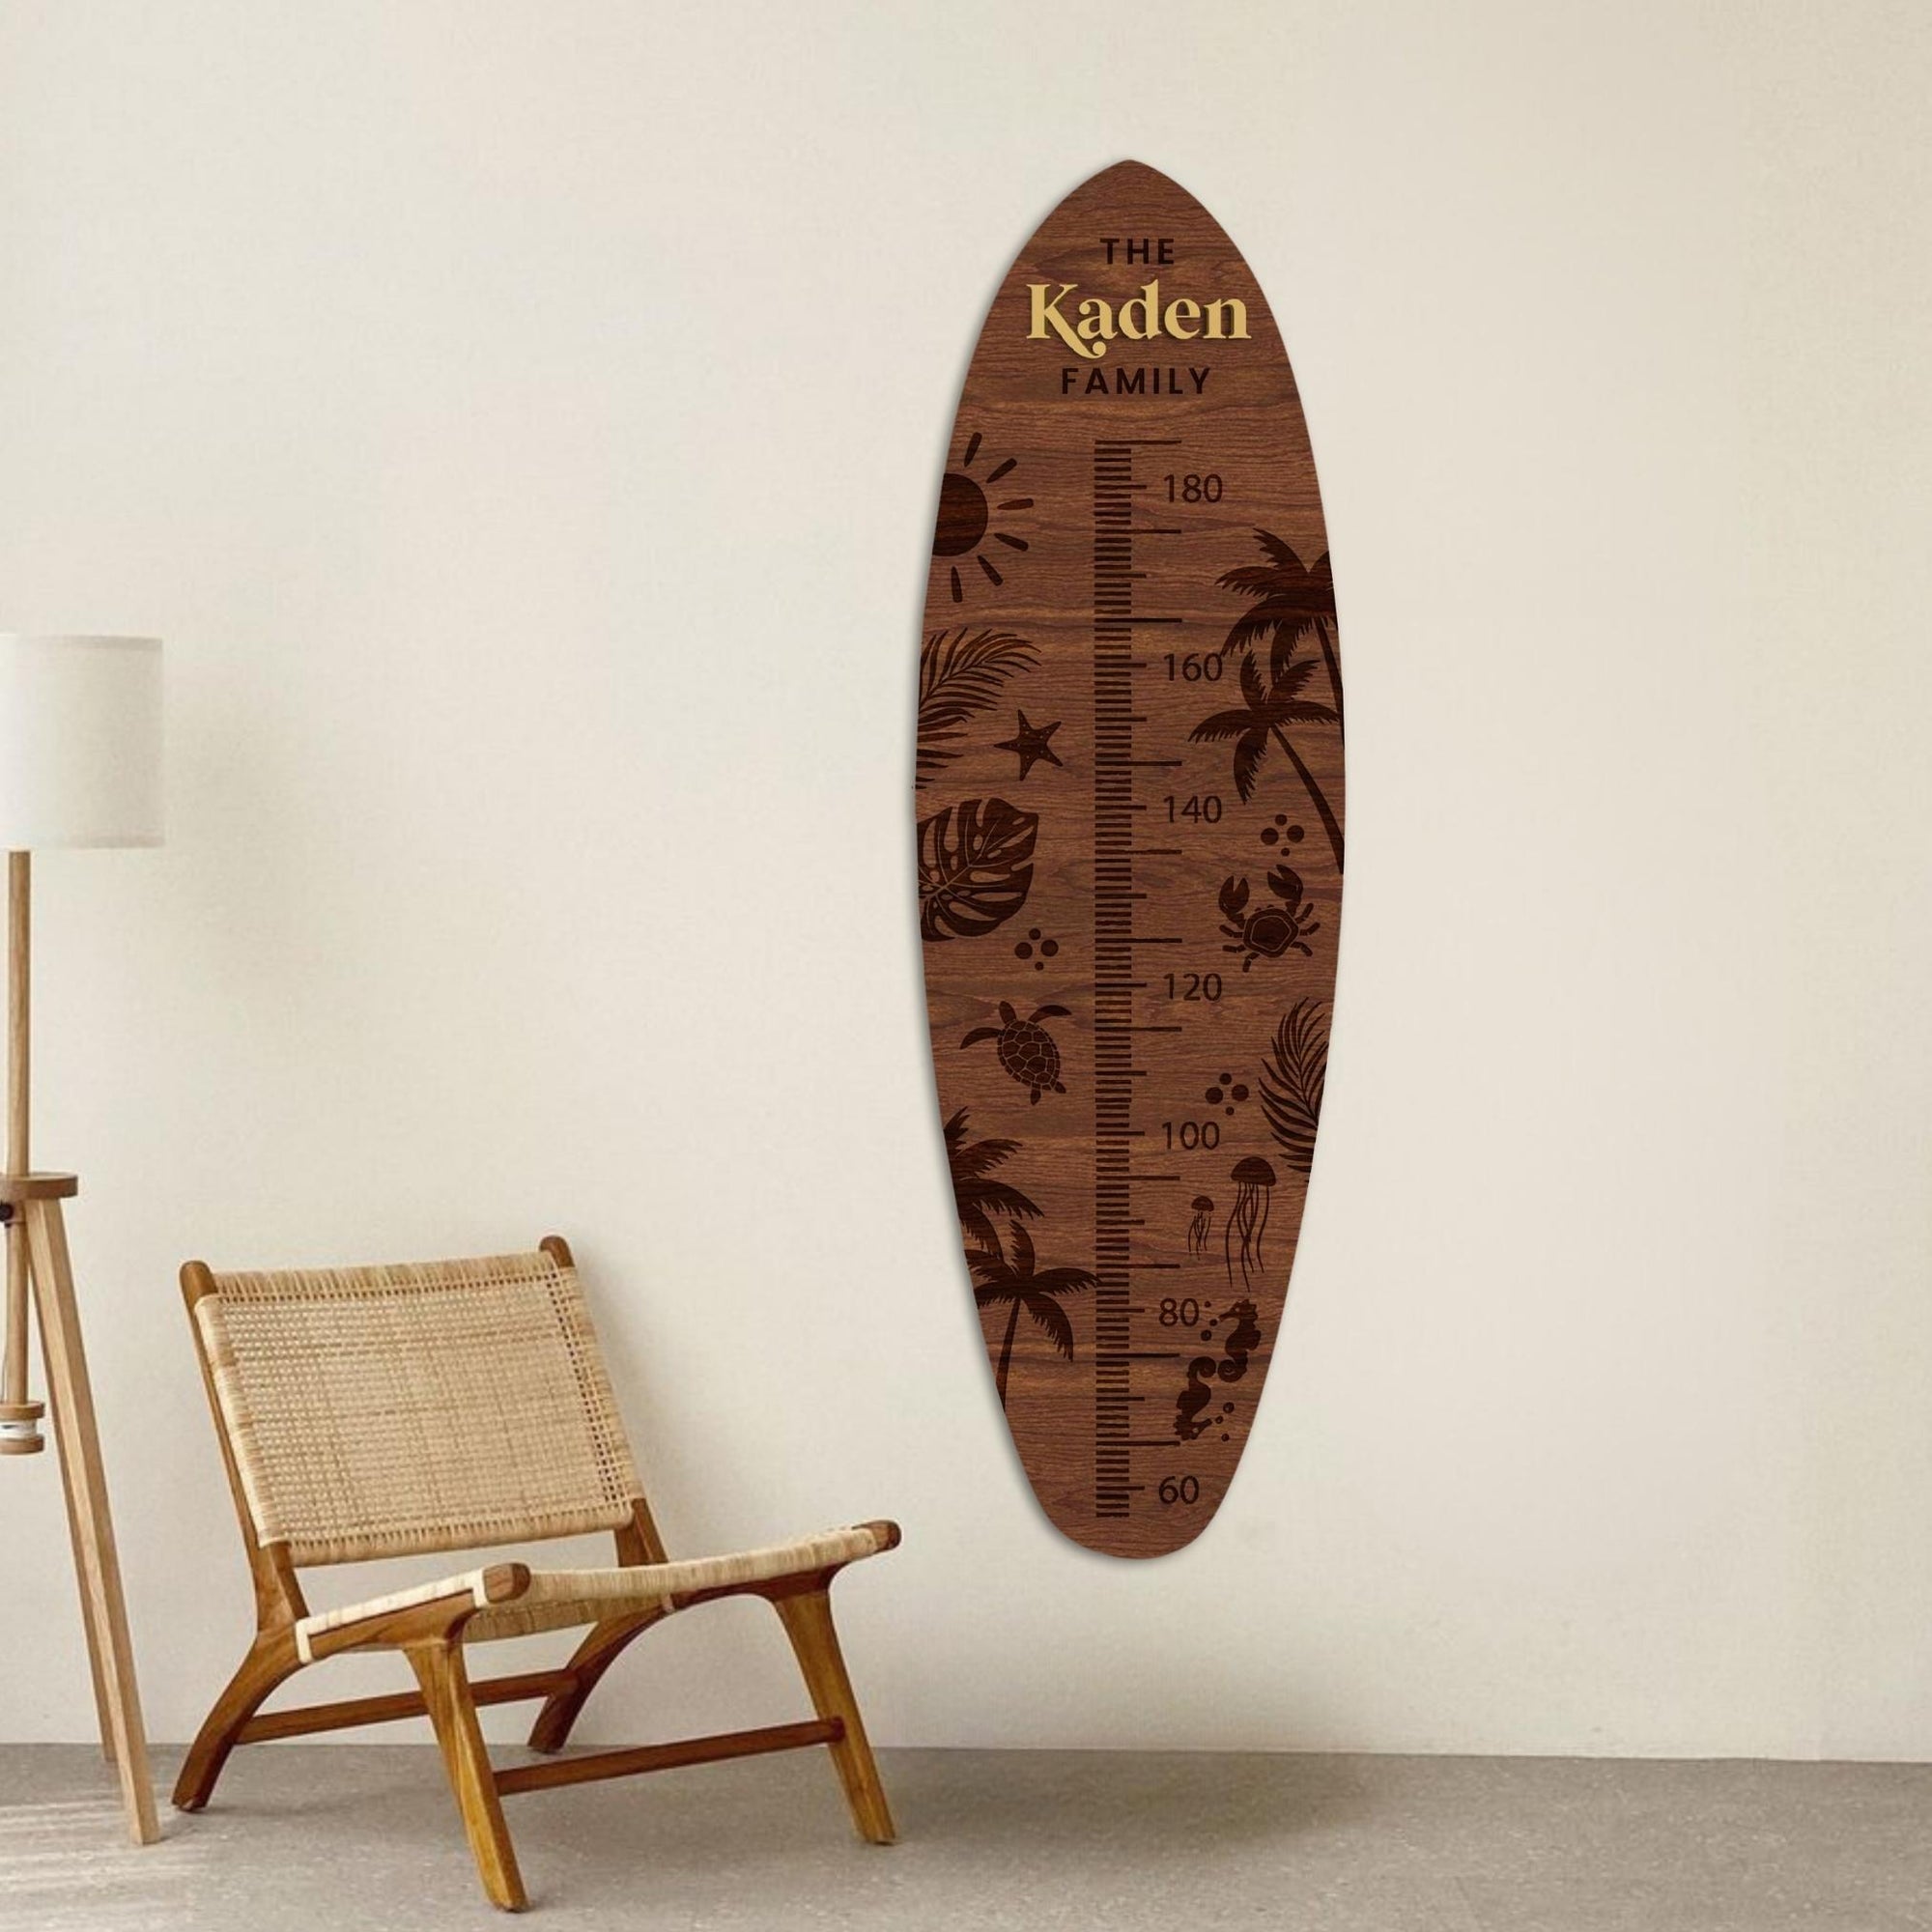 Custom 3D Raised Name Wooden Surfboard Height Chart, Personalised Laser Cut &amp; Engraved Family Growth Metric Ruler Record, Nursery Wall Decor